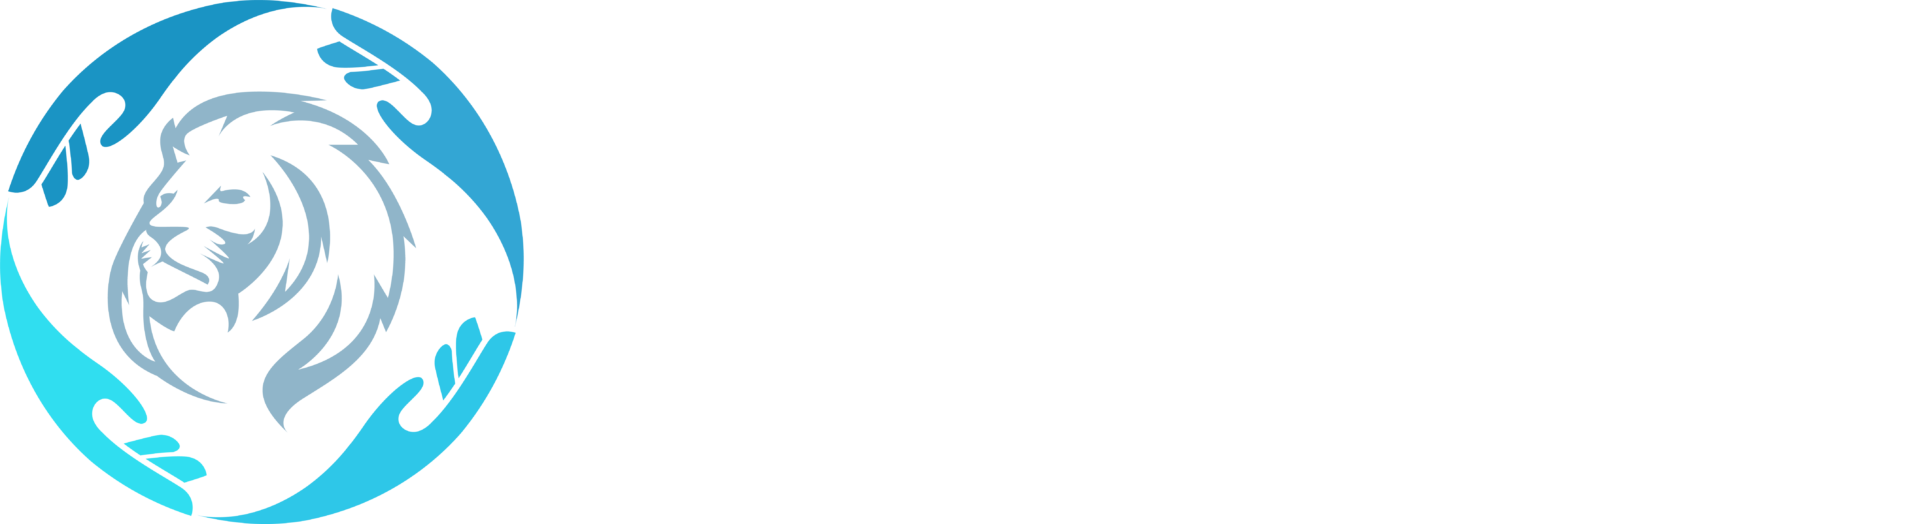 Primary Physician Partners